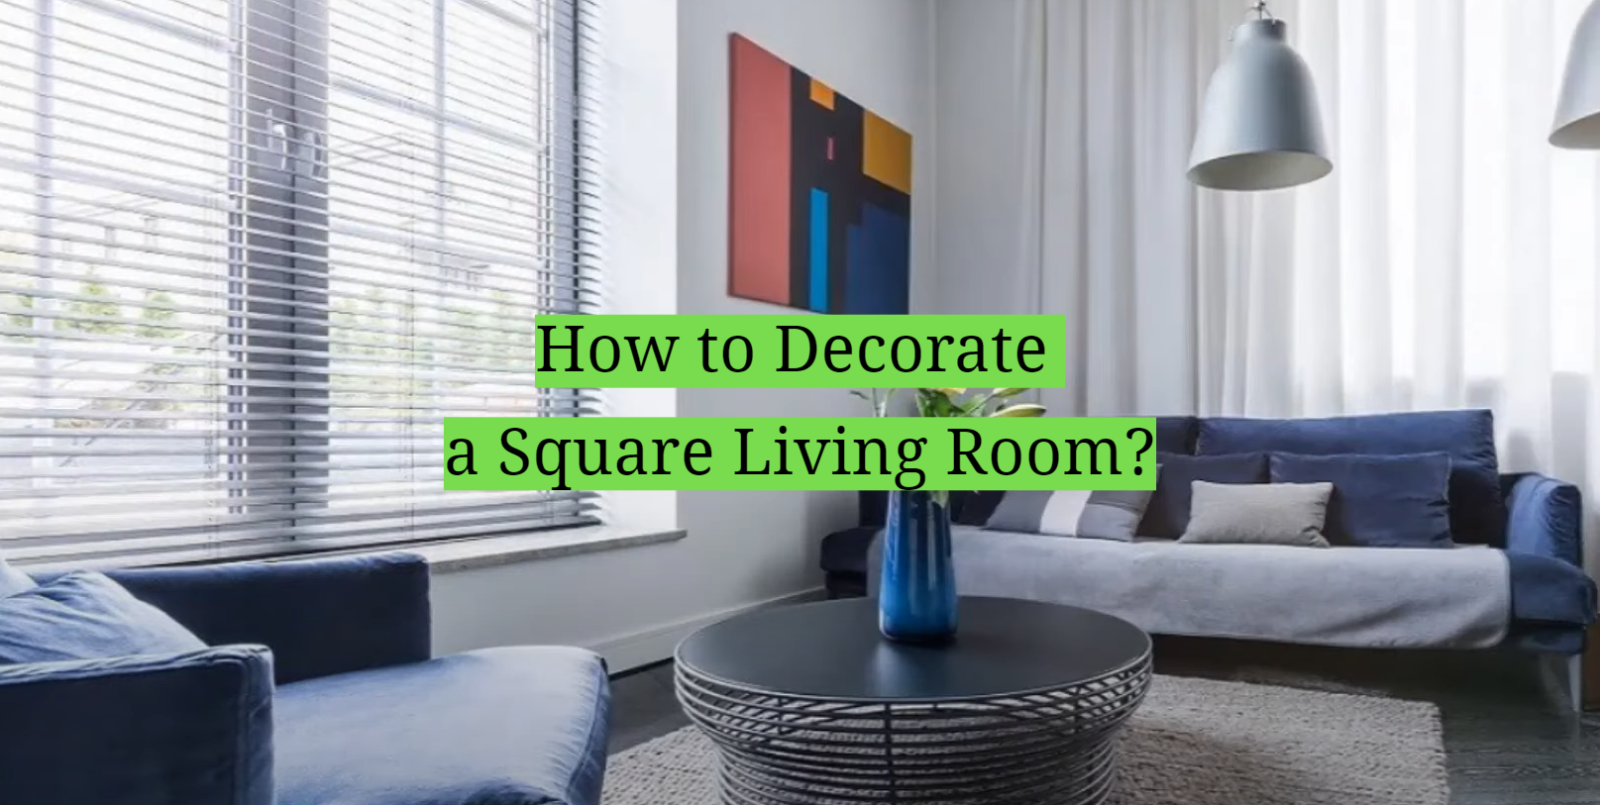 How to Decorate a Square Living Room?